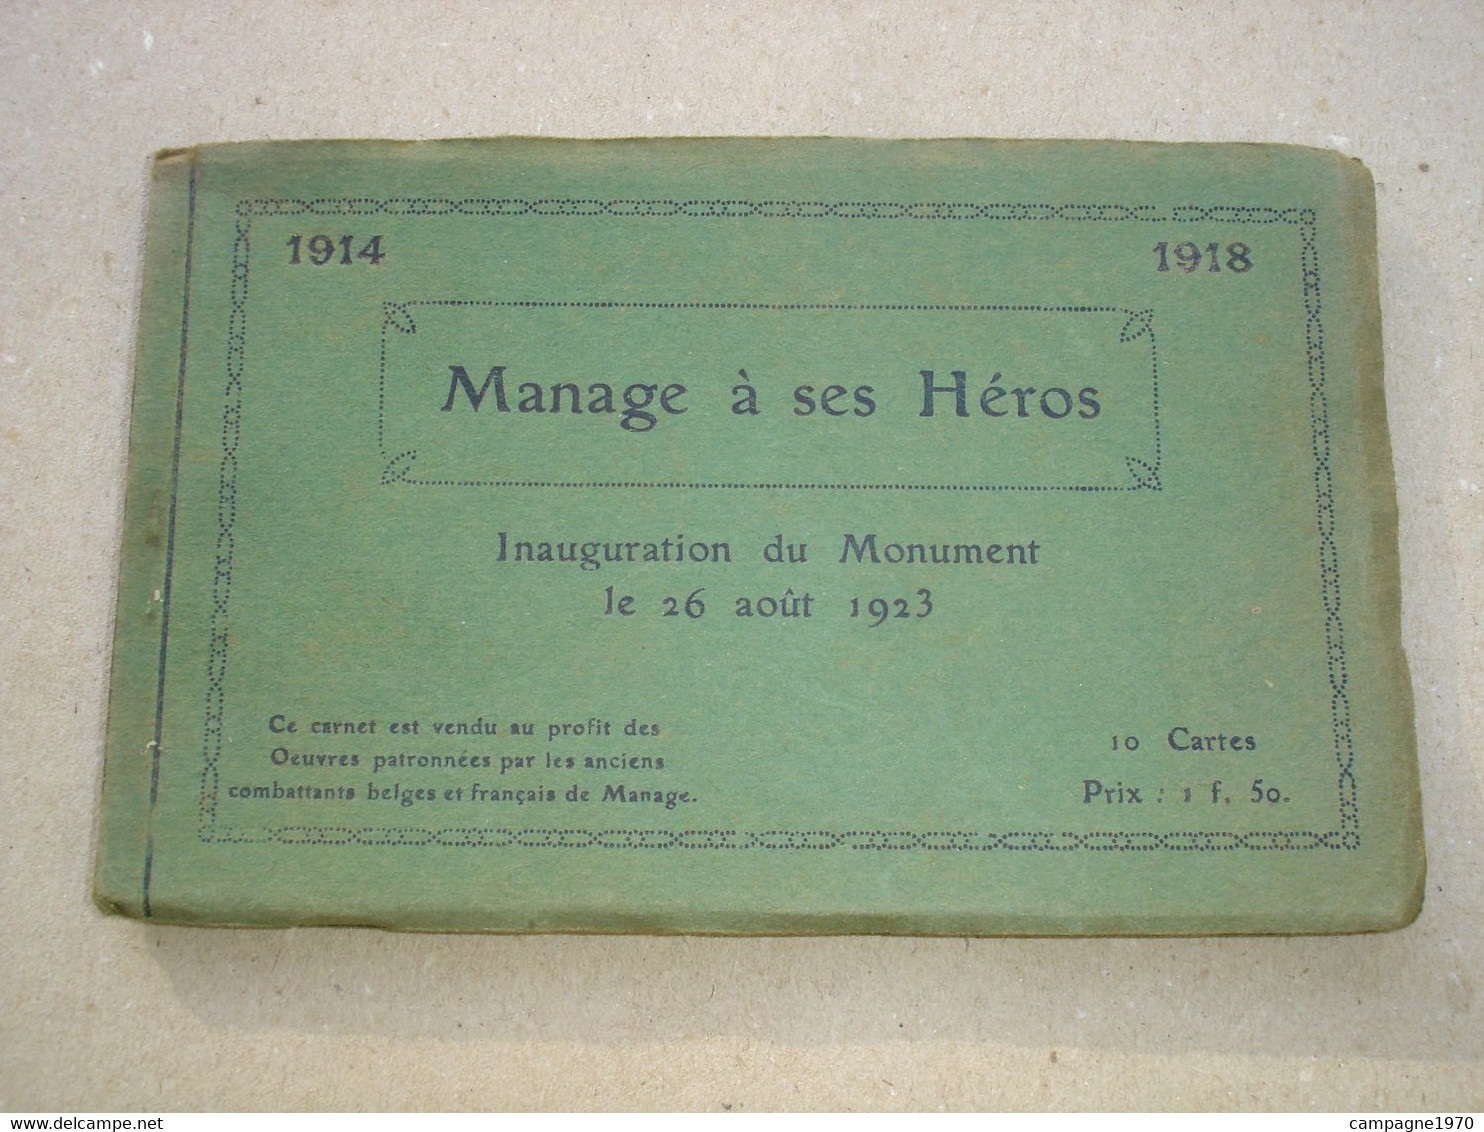 CARNET 10 CPA - MANAGE ( SENEFFE LA LOUVIERE ) - INAUGURATION MONUMENT WW1 - 26 AOUT 1923 ( COMPLET ) - Manage